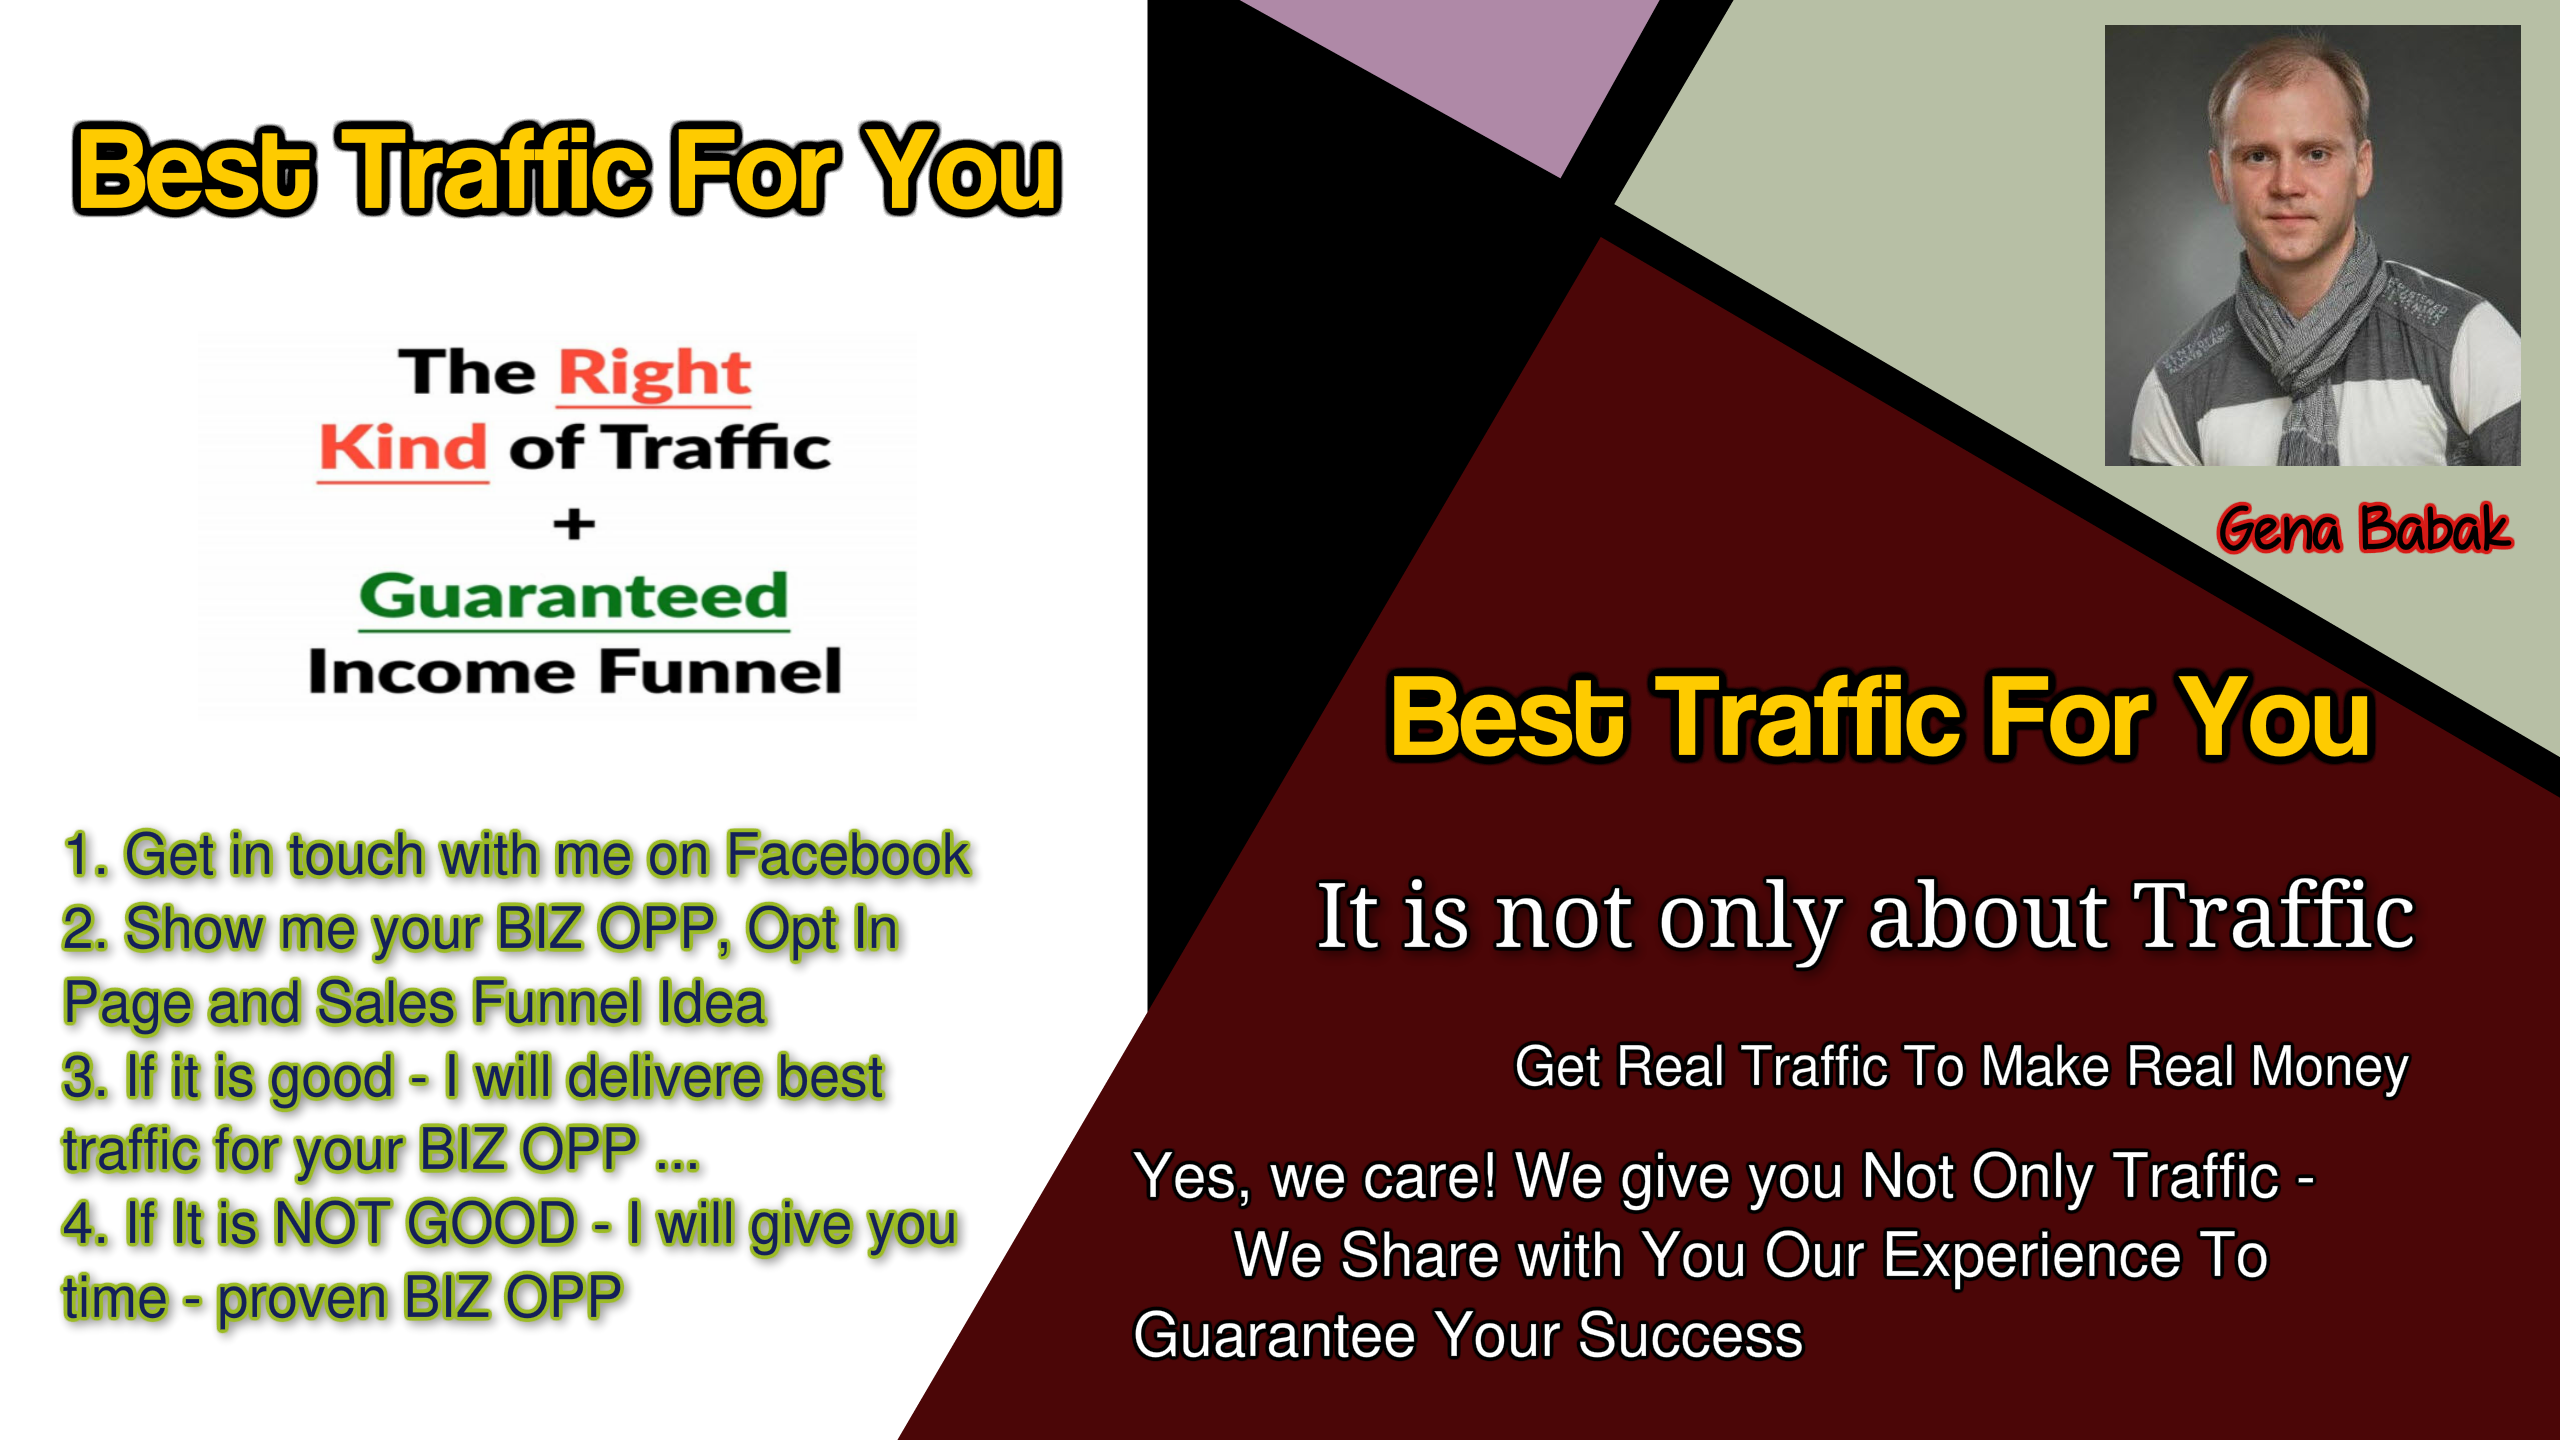 BEST PAID TRAFFIC FOR YOU